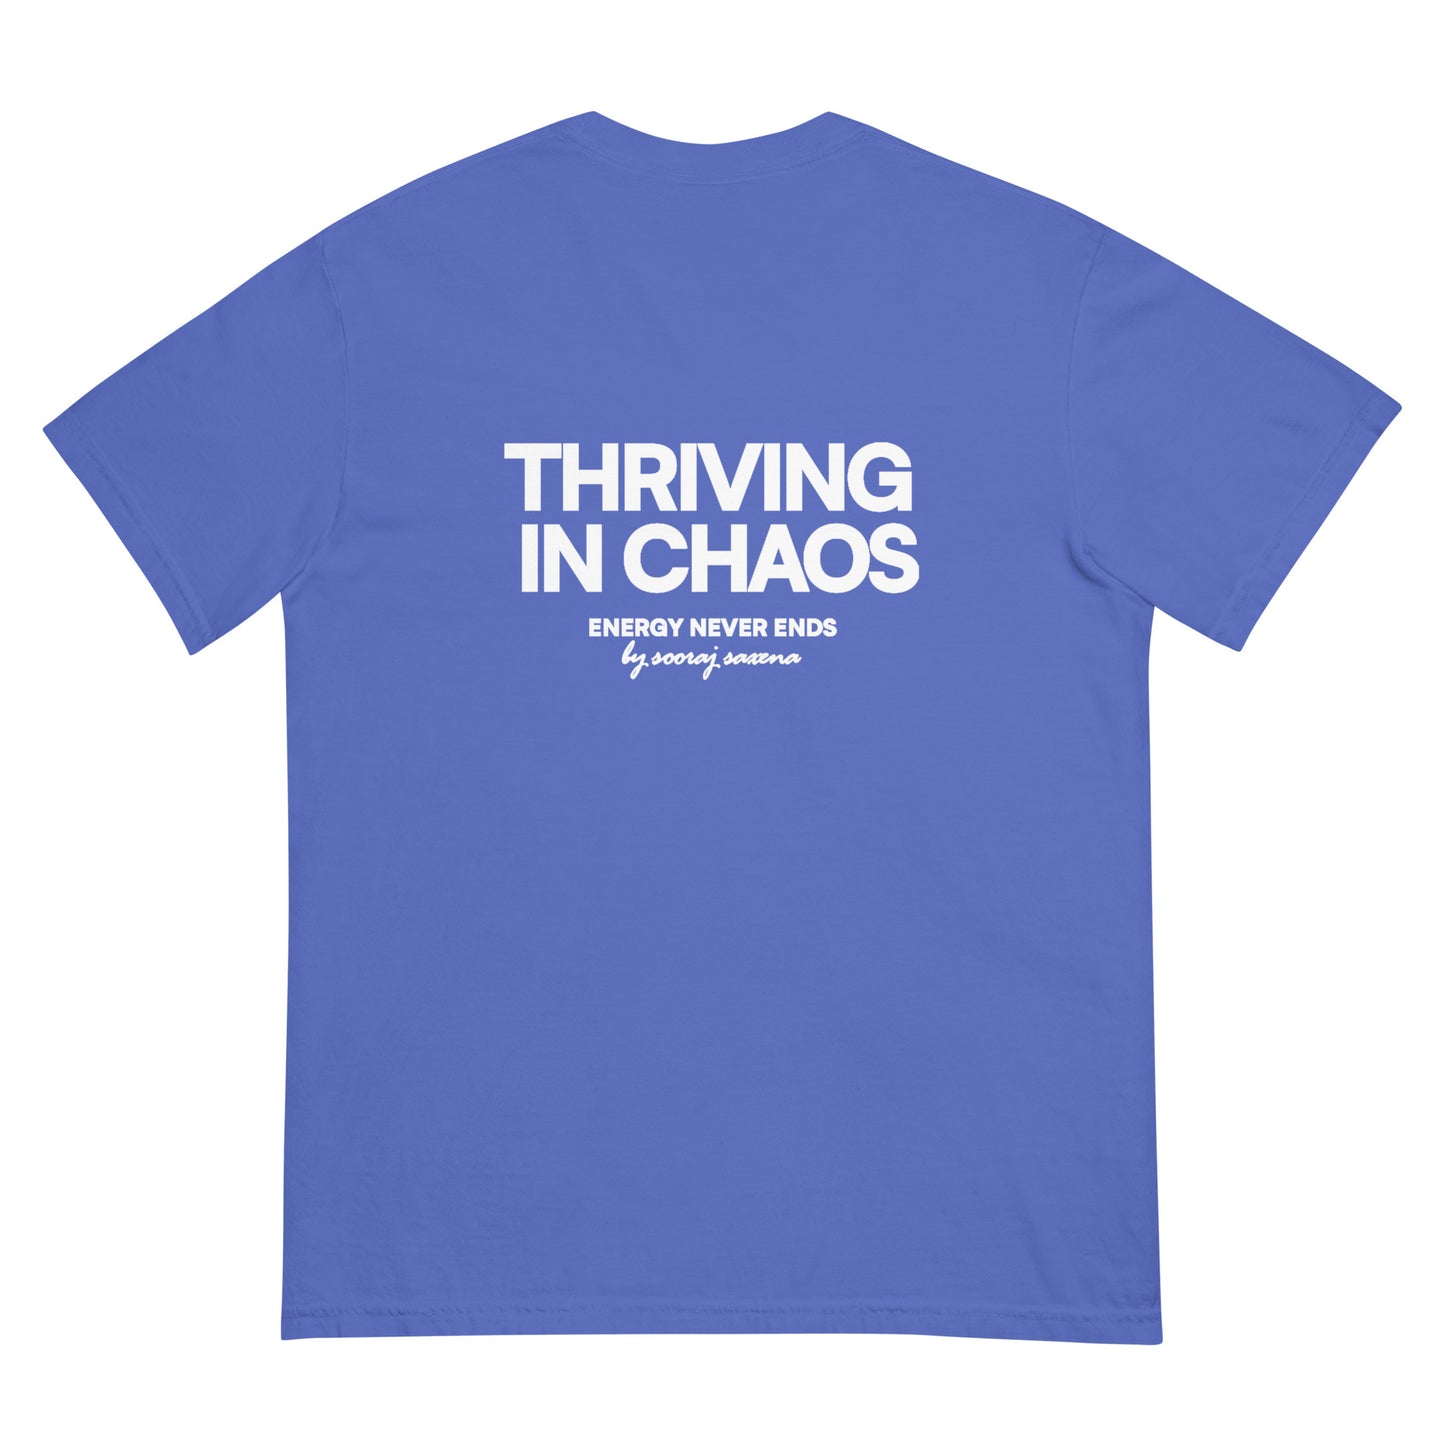 THRIVING IN CHAOS - VOL. 1 (T-SHIRT) VIOLET